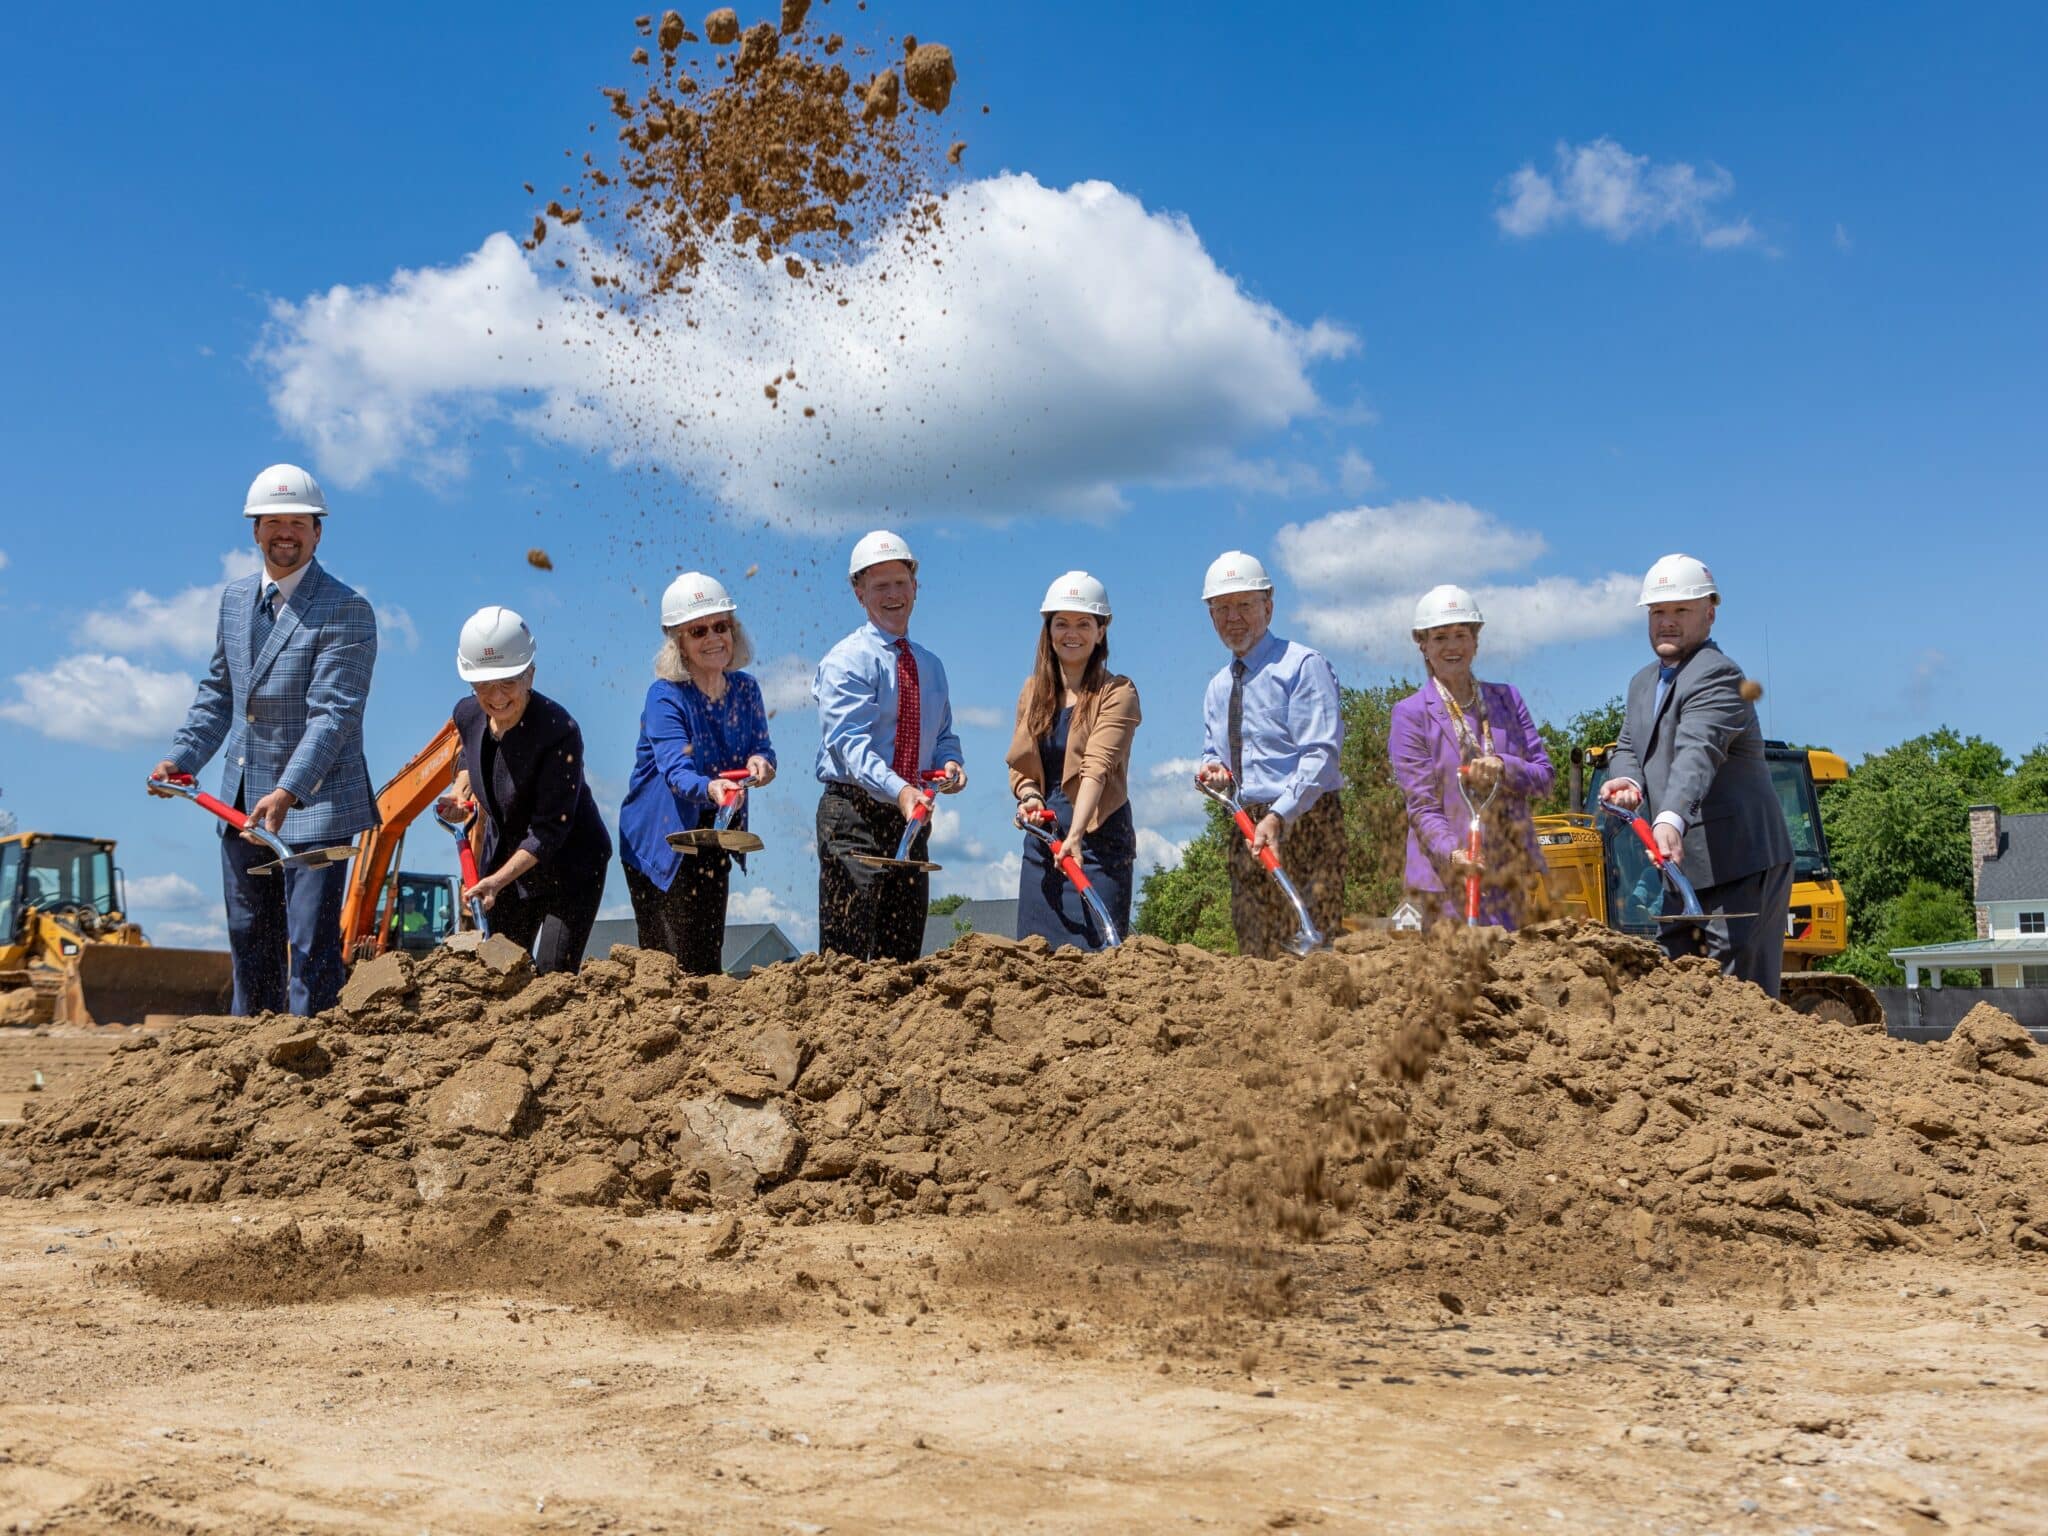 The participants dig in excitement as the expansion project groundbreaking begins coming to fruition.